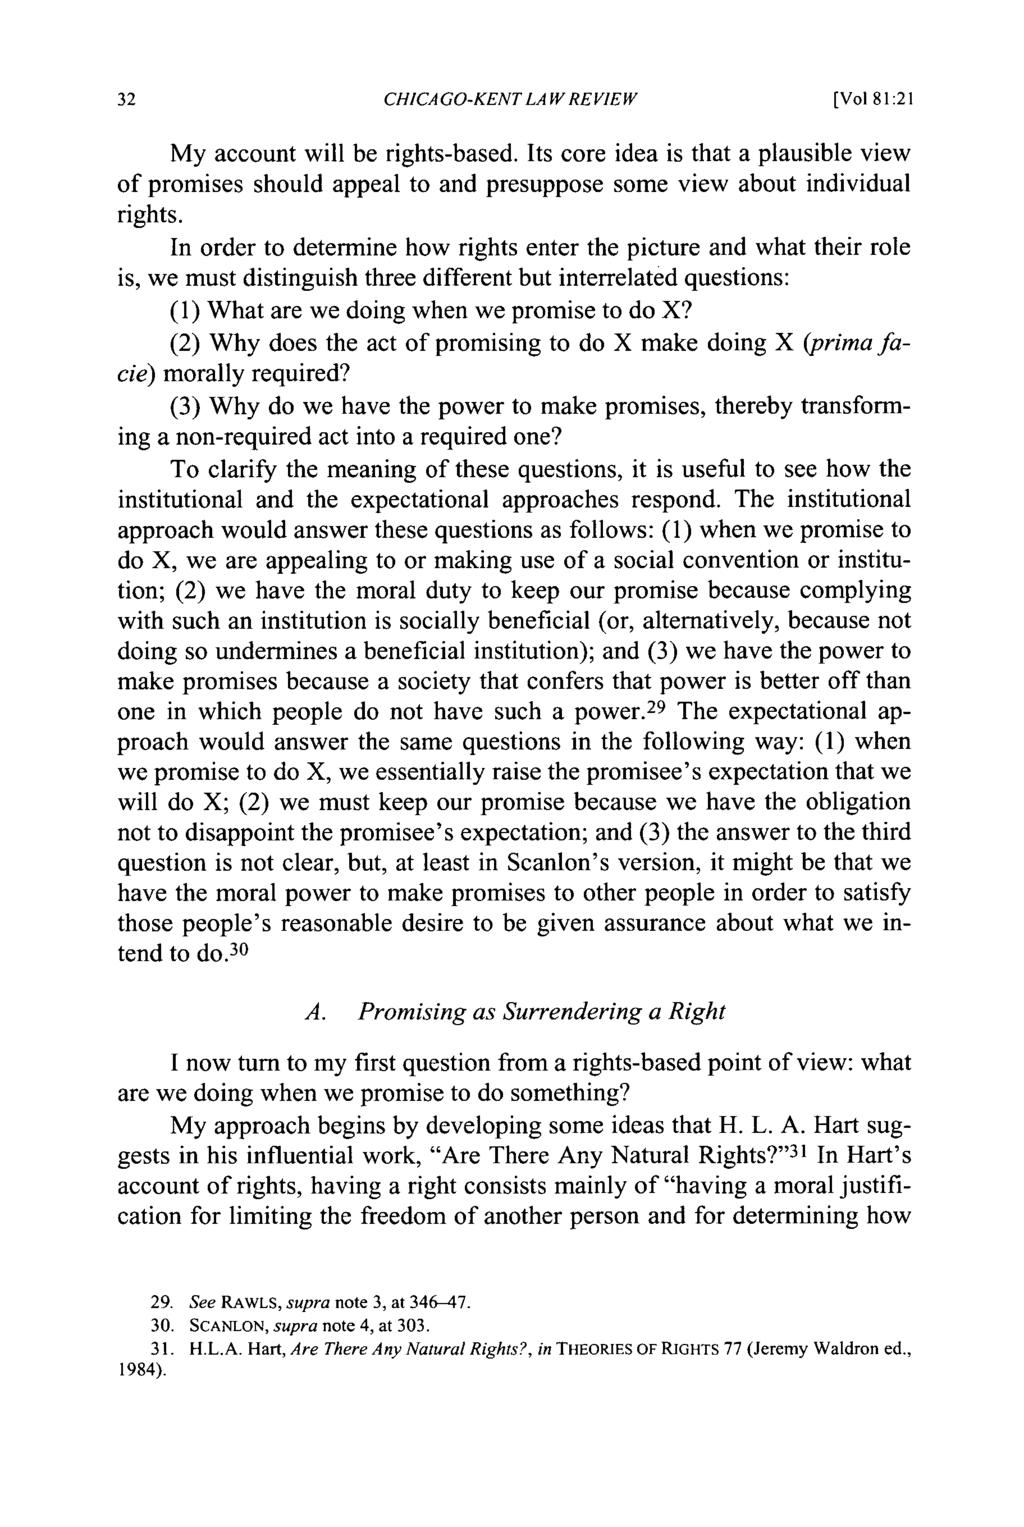 CHICA GO-KENT LAW REVIEW [Vol 81:21 My account will be rights-based. Its core idea is that a plausible view of promises should appeal to and presuppose some view about individual rights.